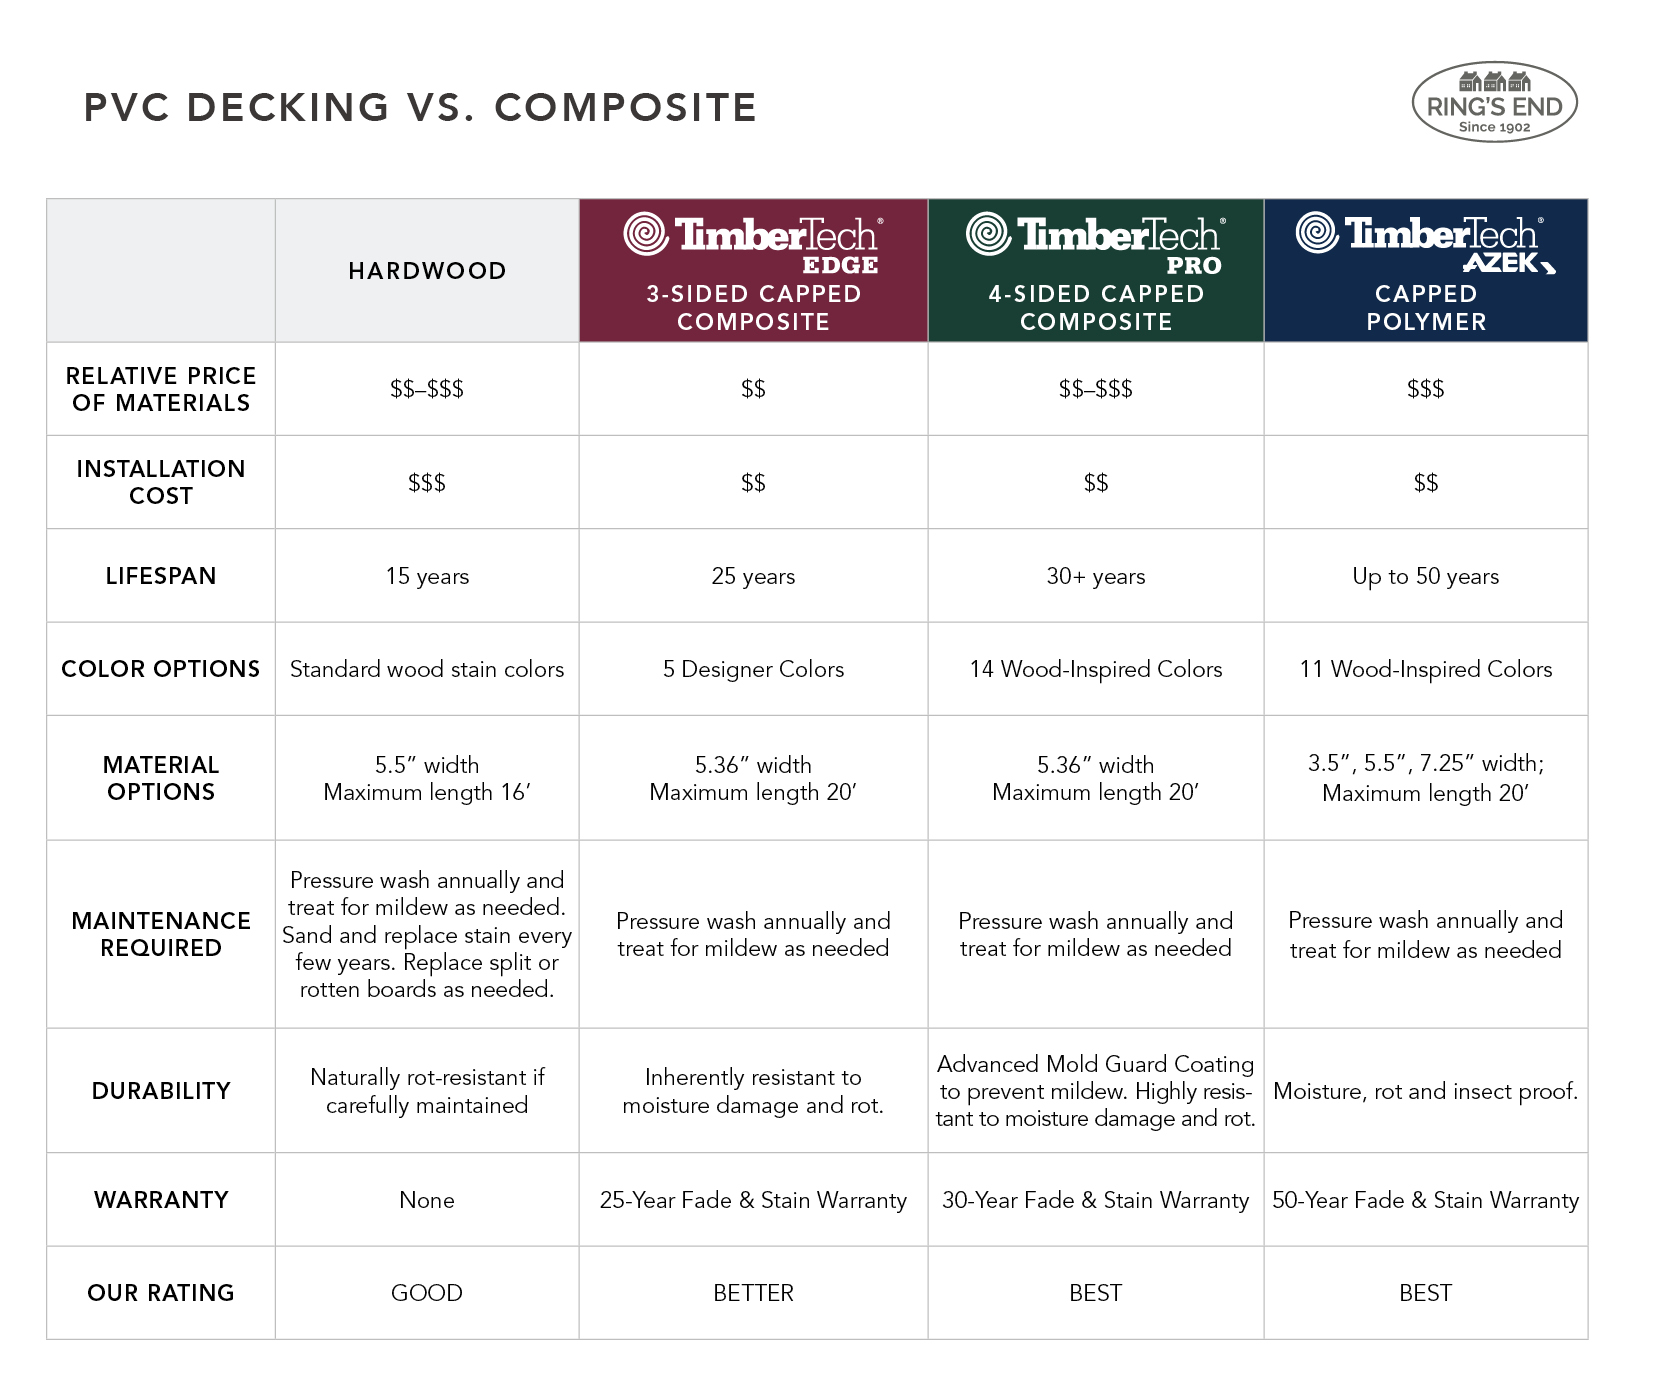 Comparison of wood decking, composite decking, and PVC decking 